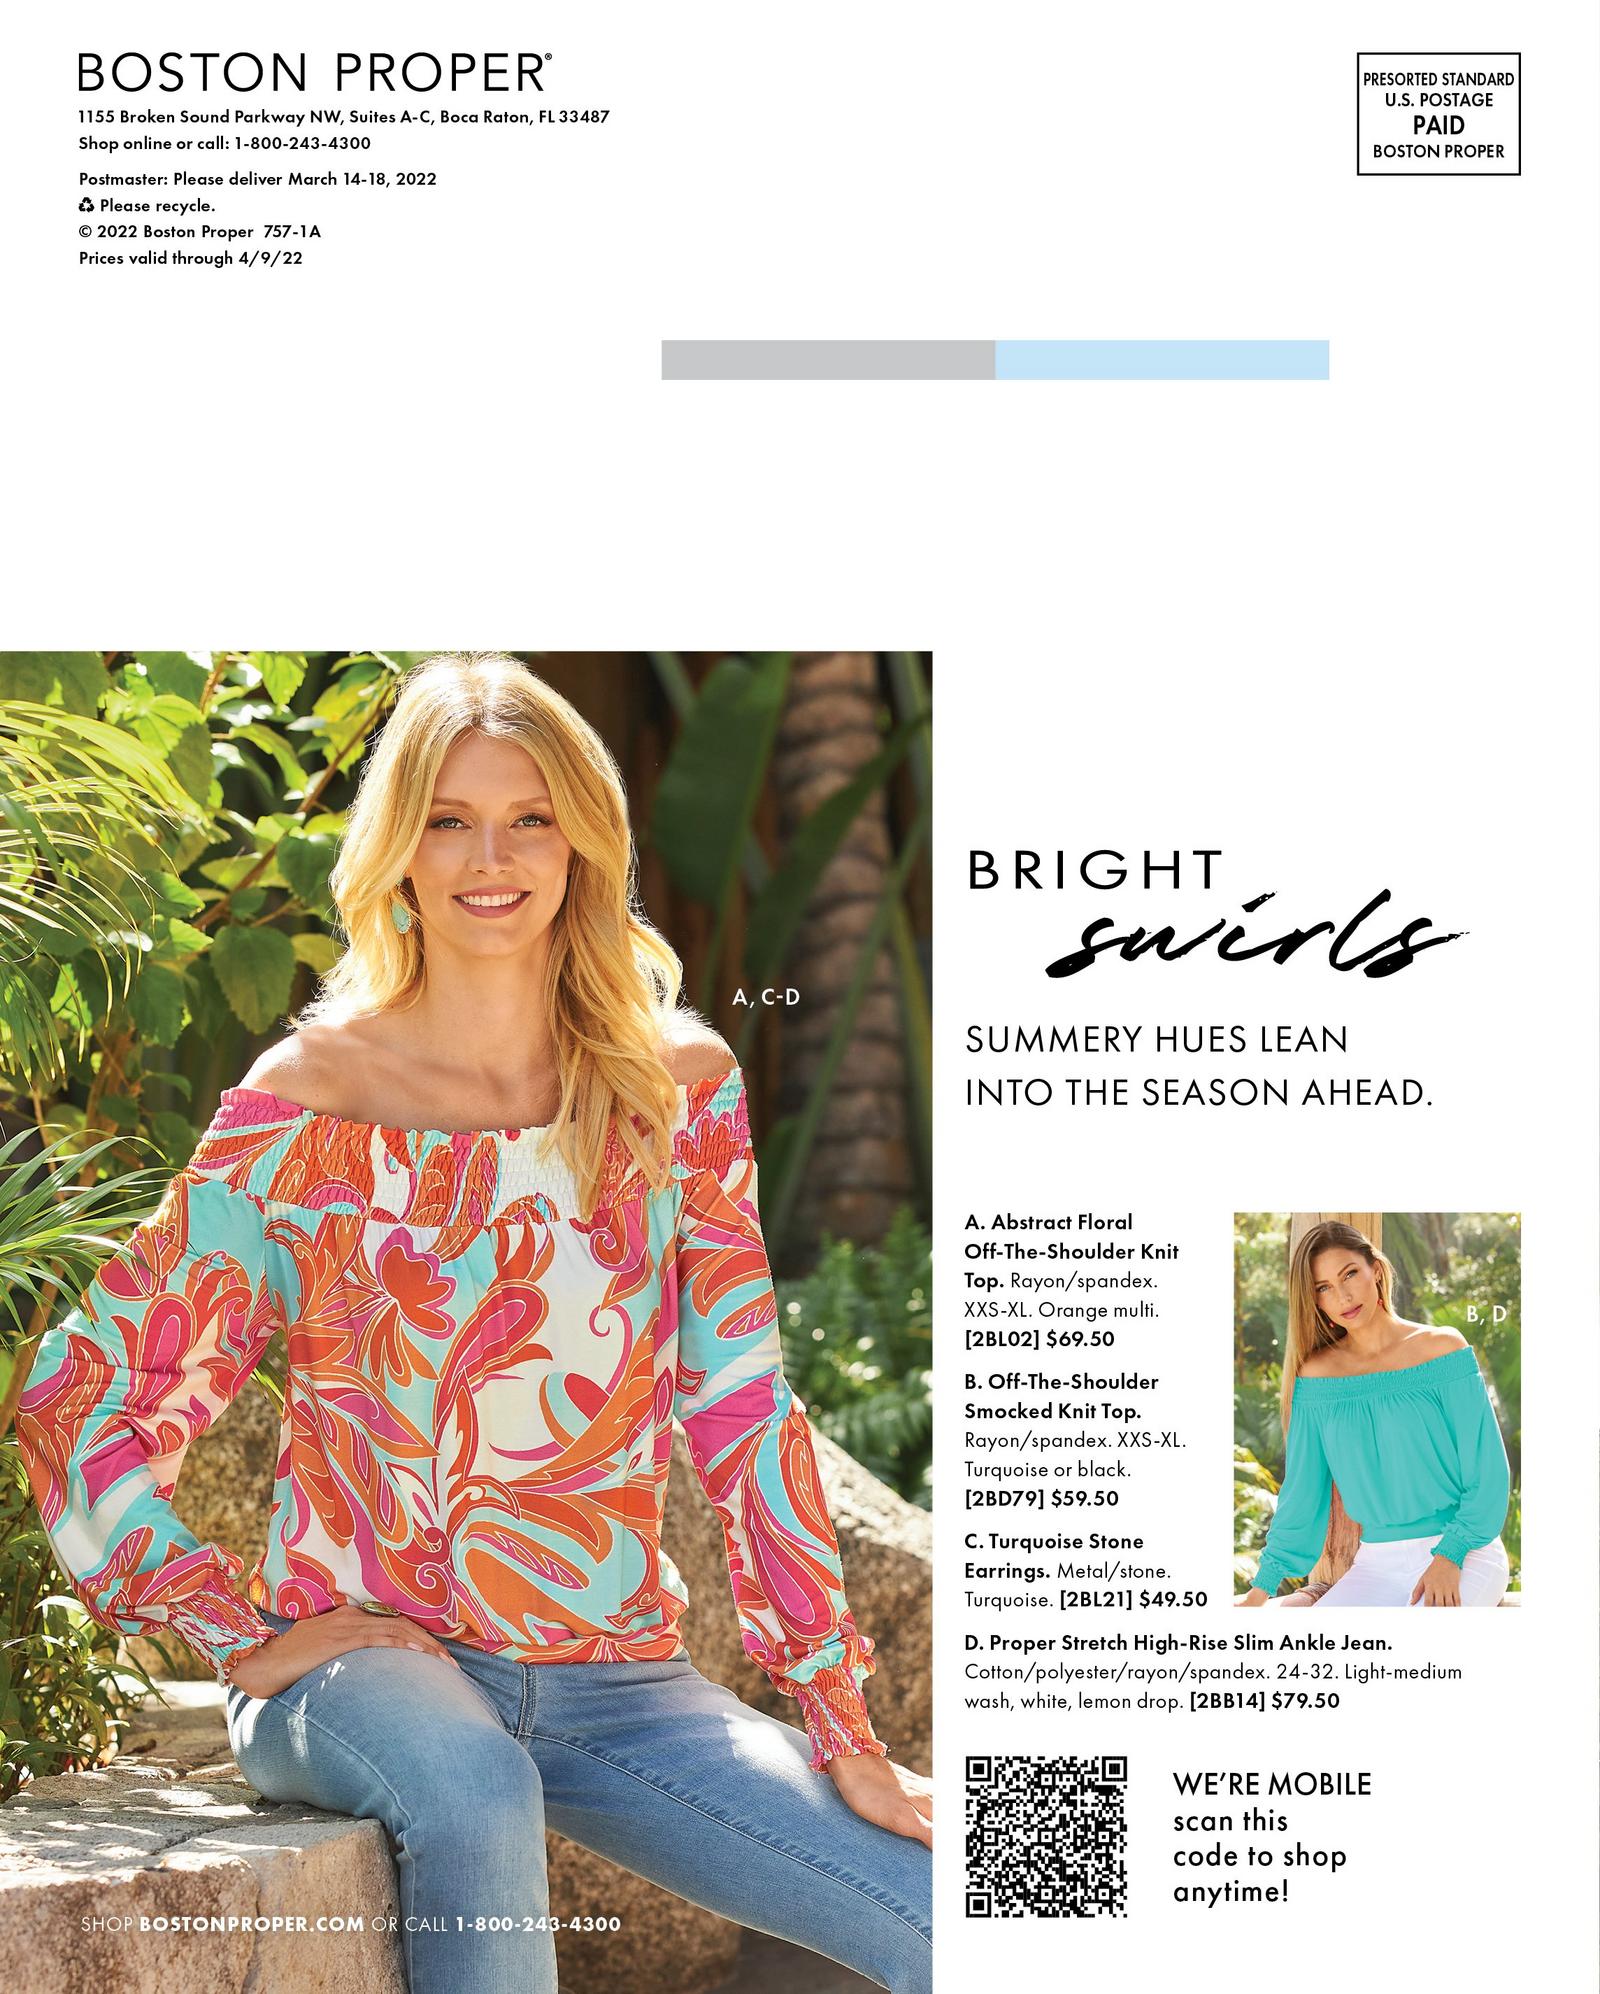 model wearing a multicolored print off-the-shoulder long sleeve top, turquoise stone earrings, and light wash jeans.